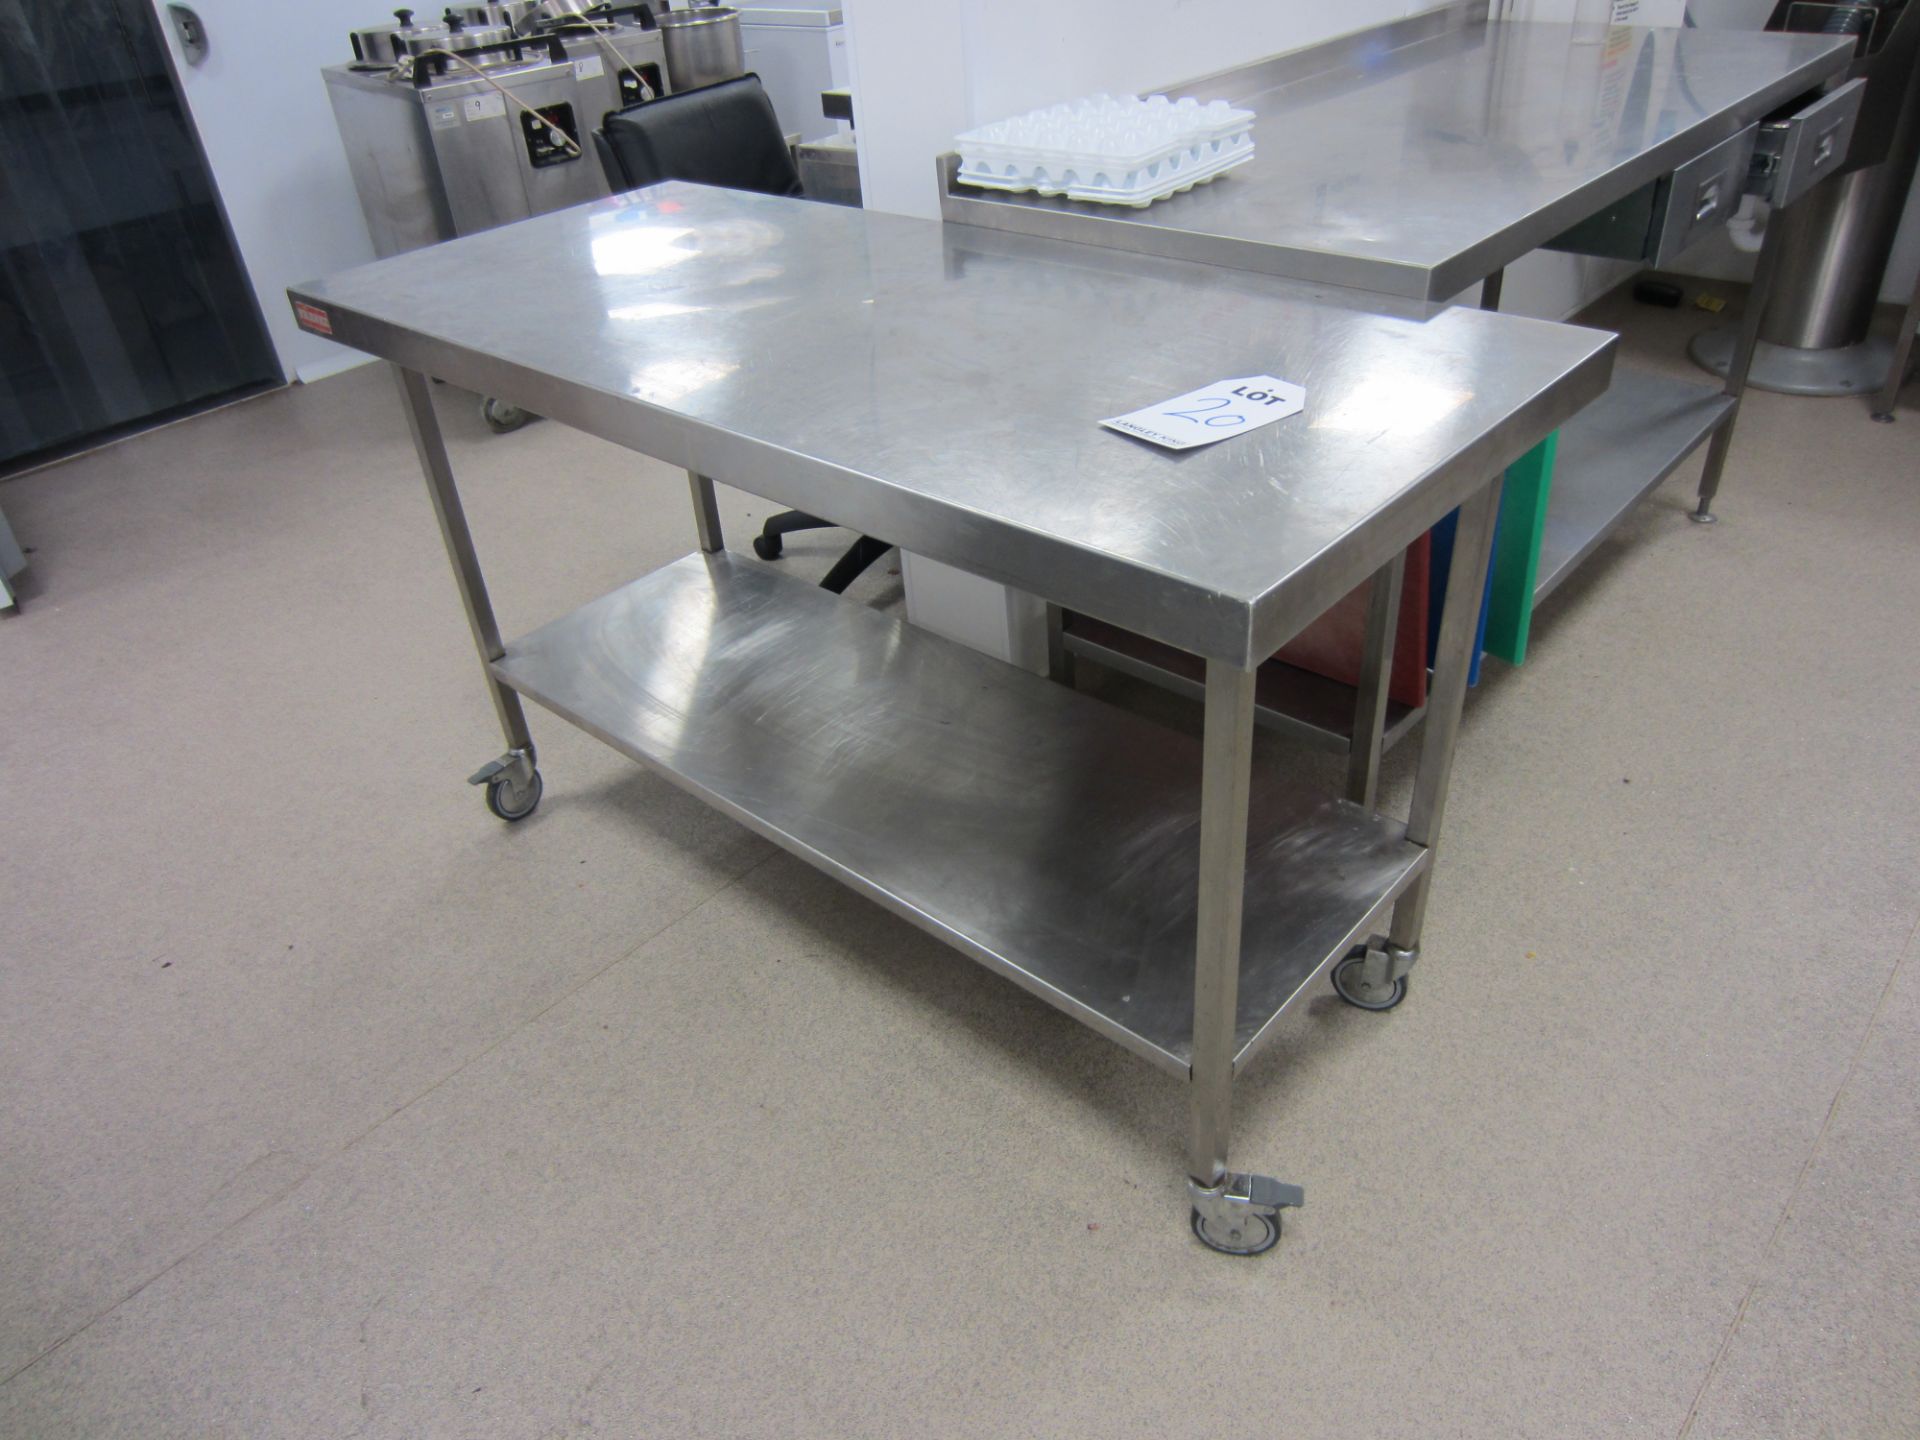 2 x Franke Stainless Steel Mobile Prep Tables 1500 x 650 - Image 2 of 2